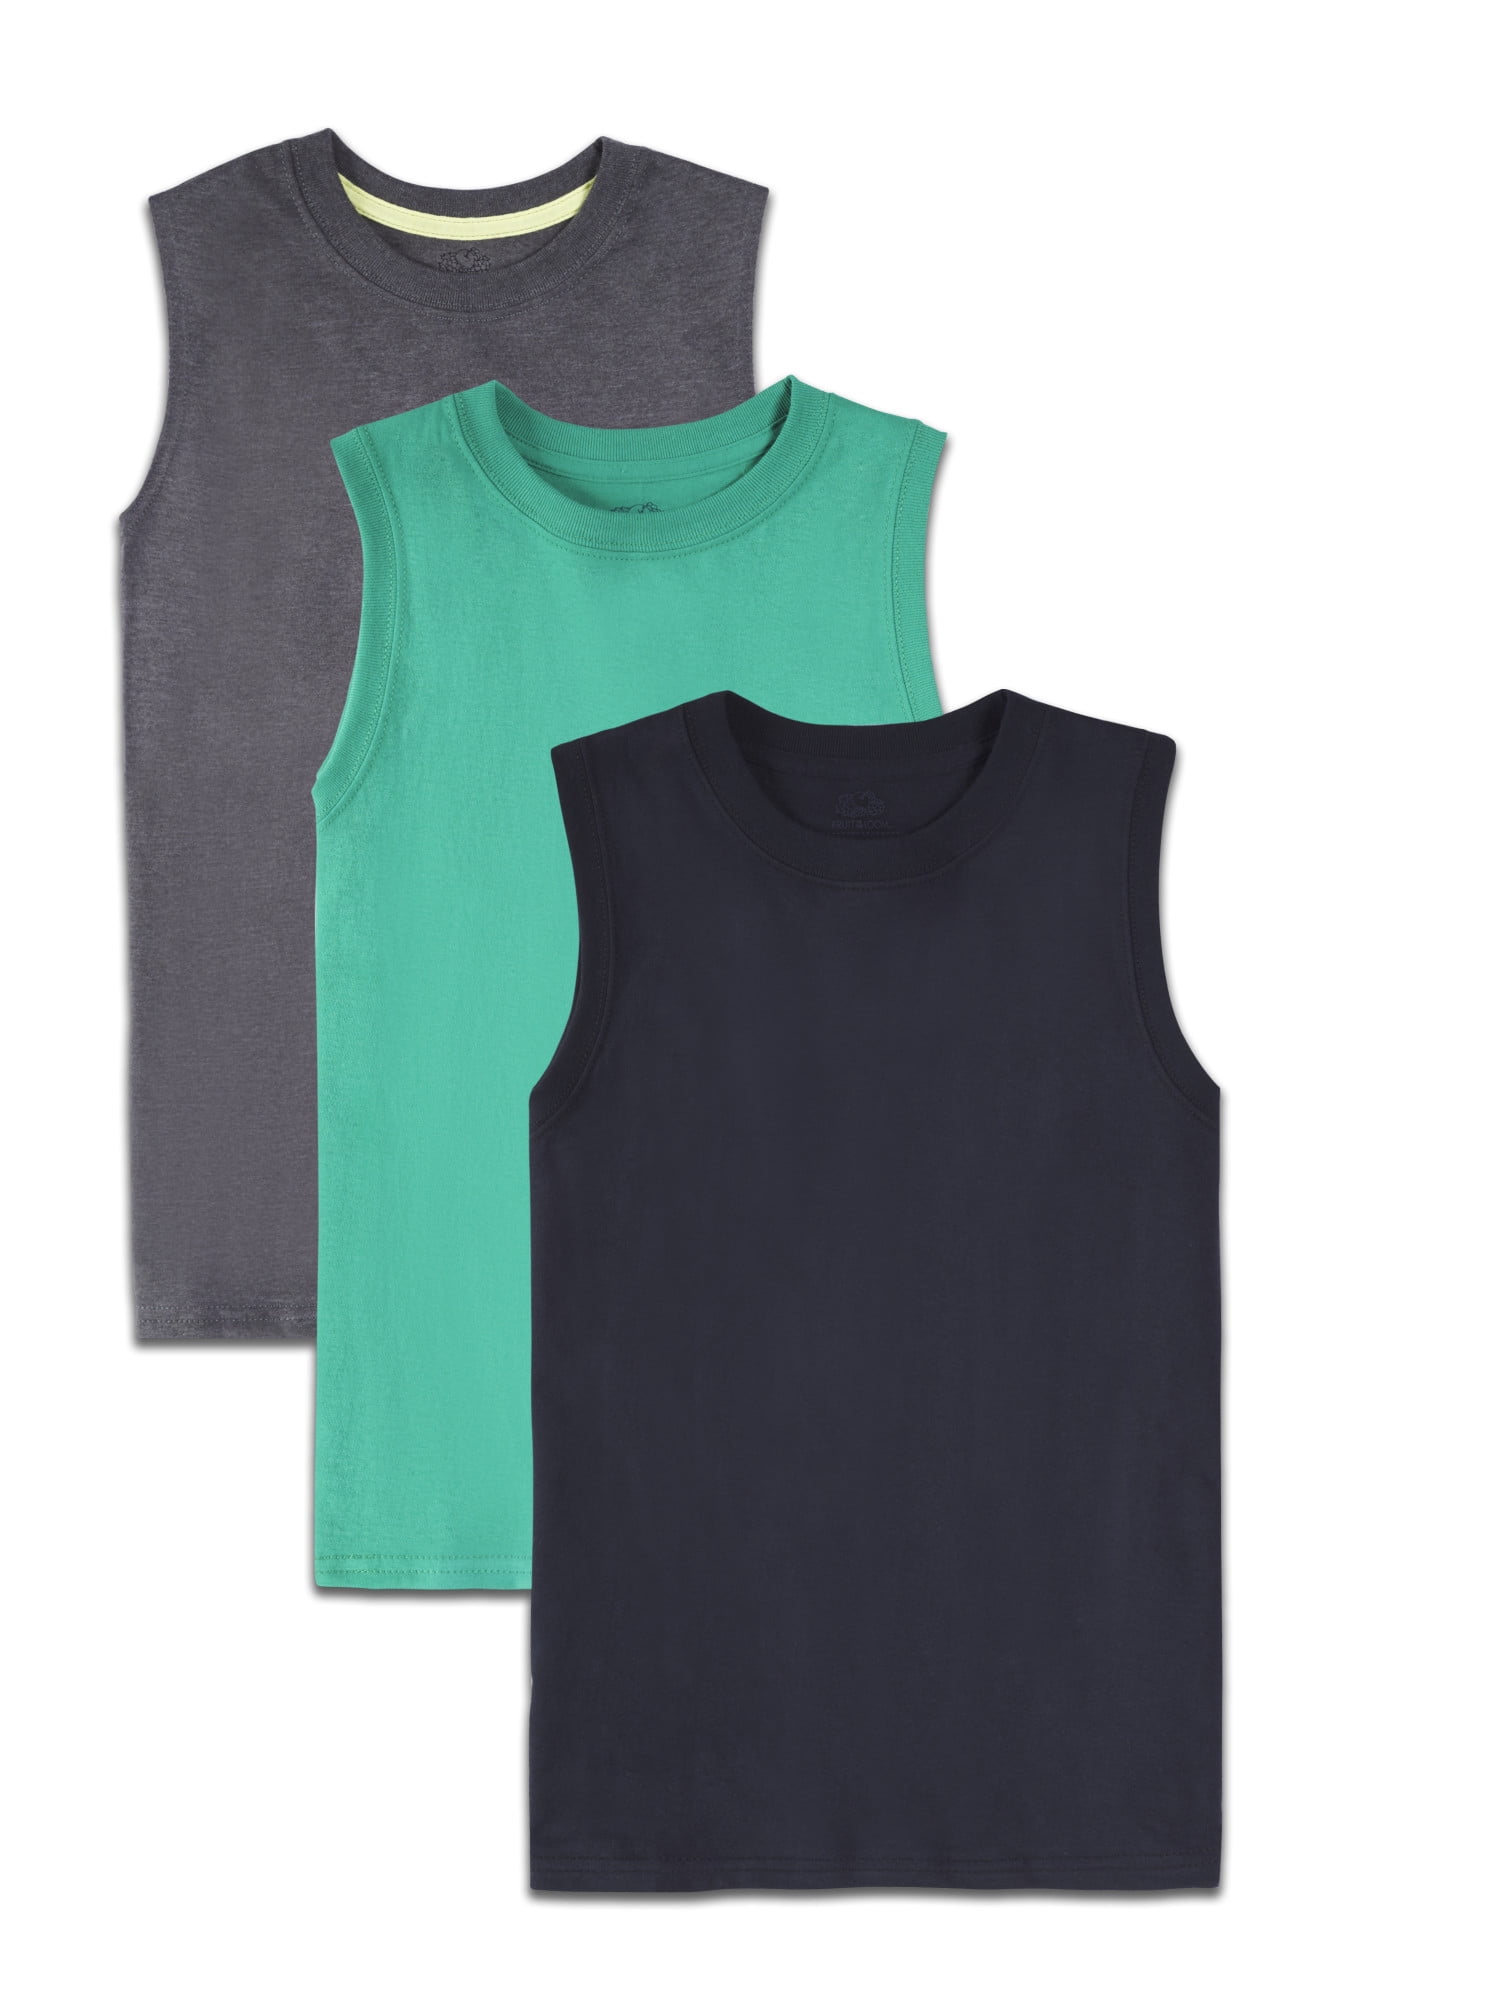 Fruit of the Loom Boys Sleeveless Muscle Shirts, 3 Pack, Sizes XS - 2XL ...